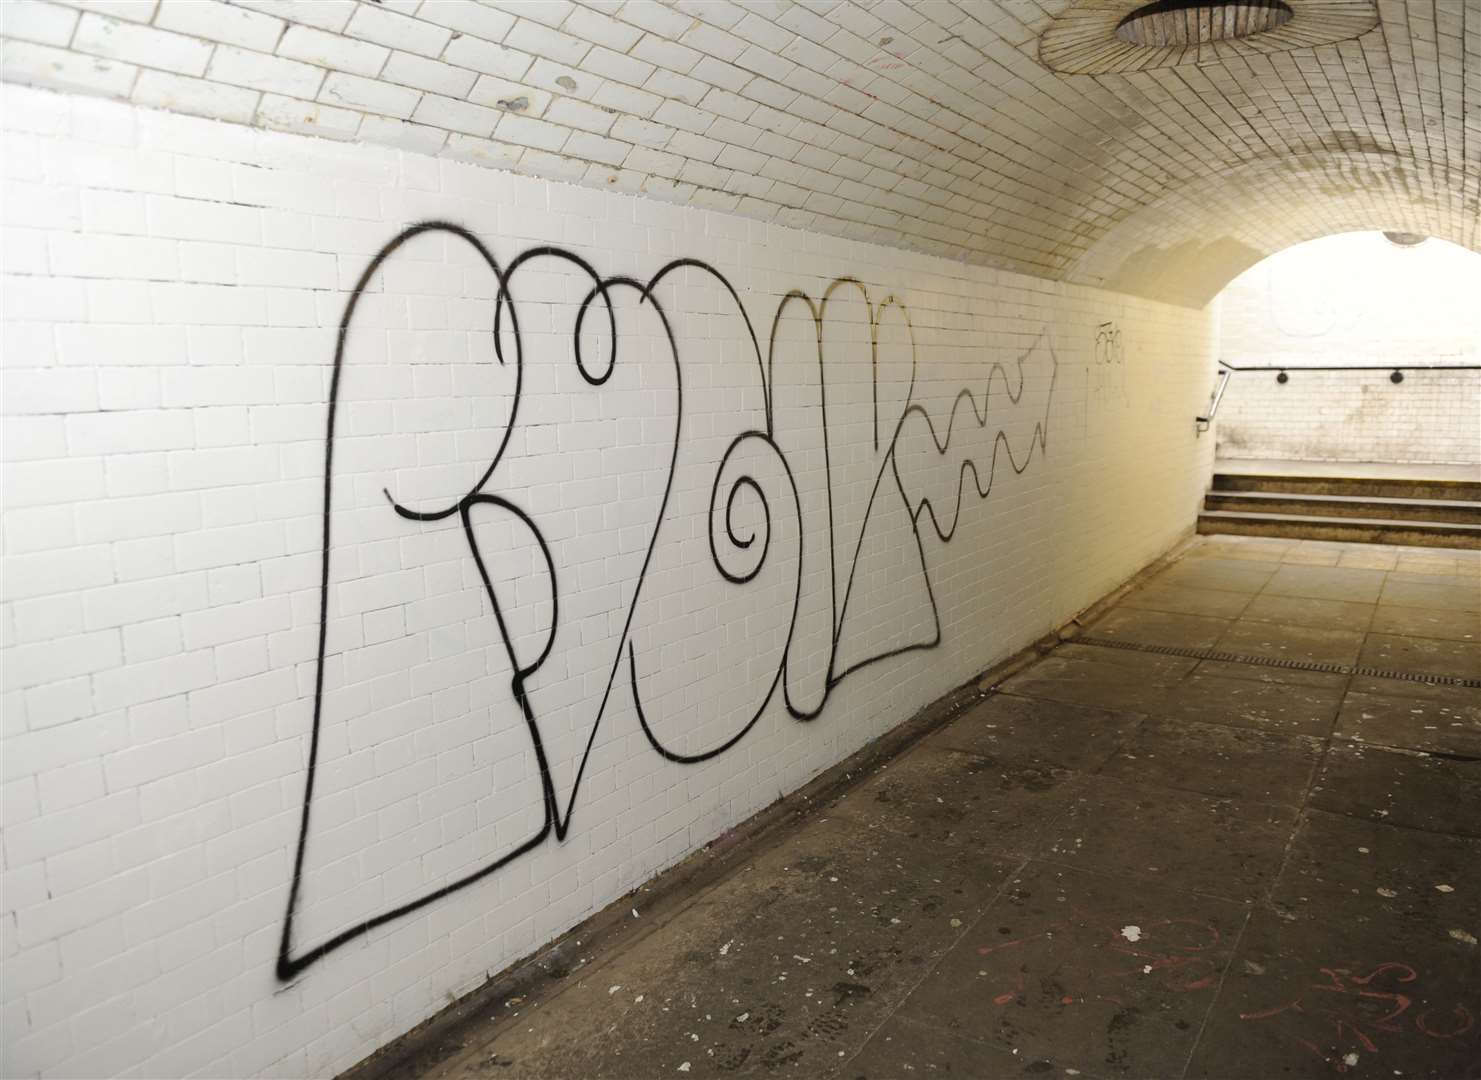 The subway under the railway line which links The Mall and Station Road, Faversham, is plagued with graffiti, litter and flooding